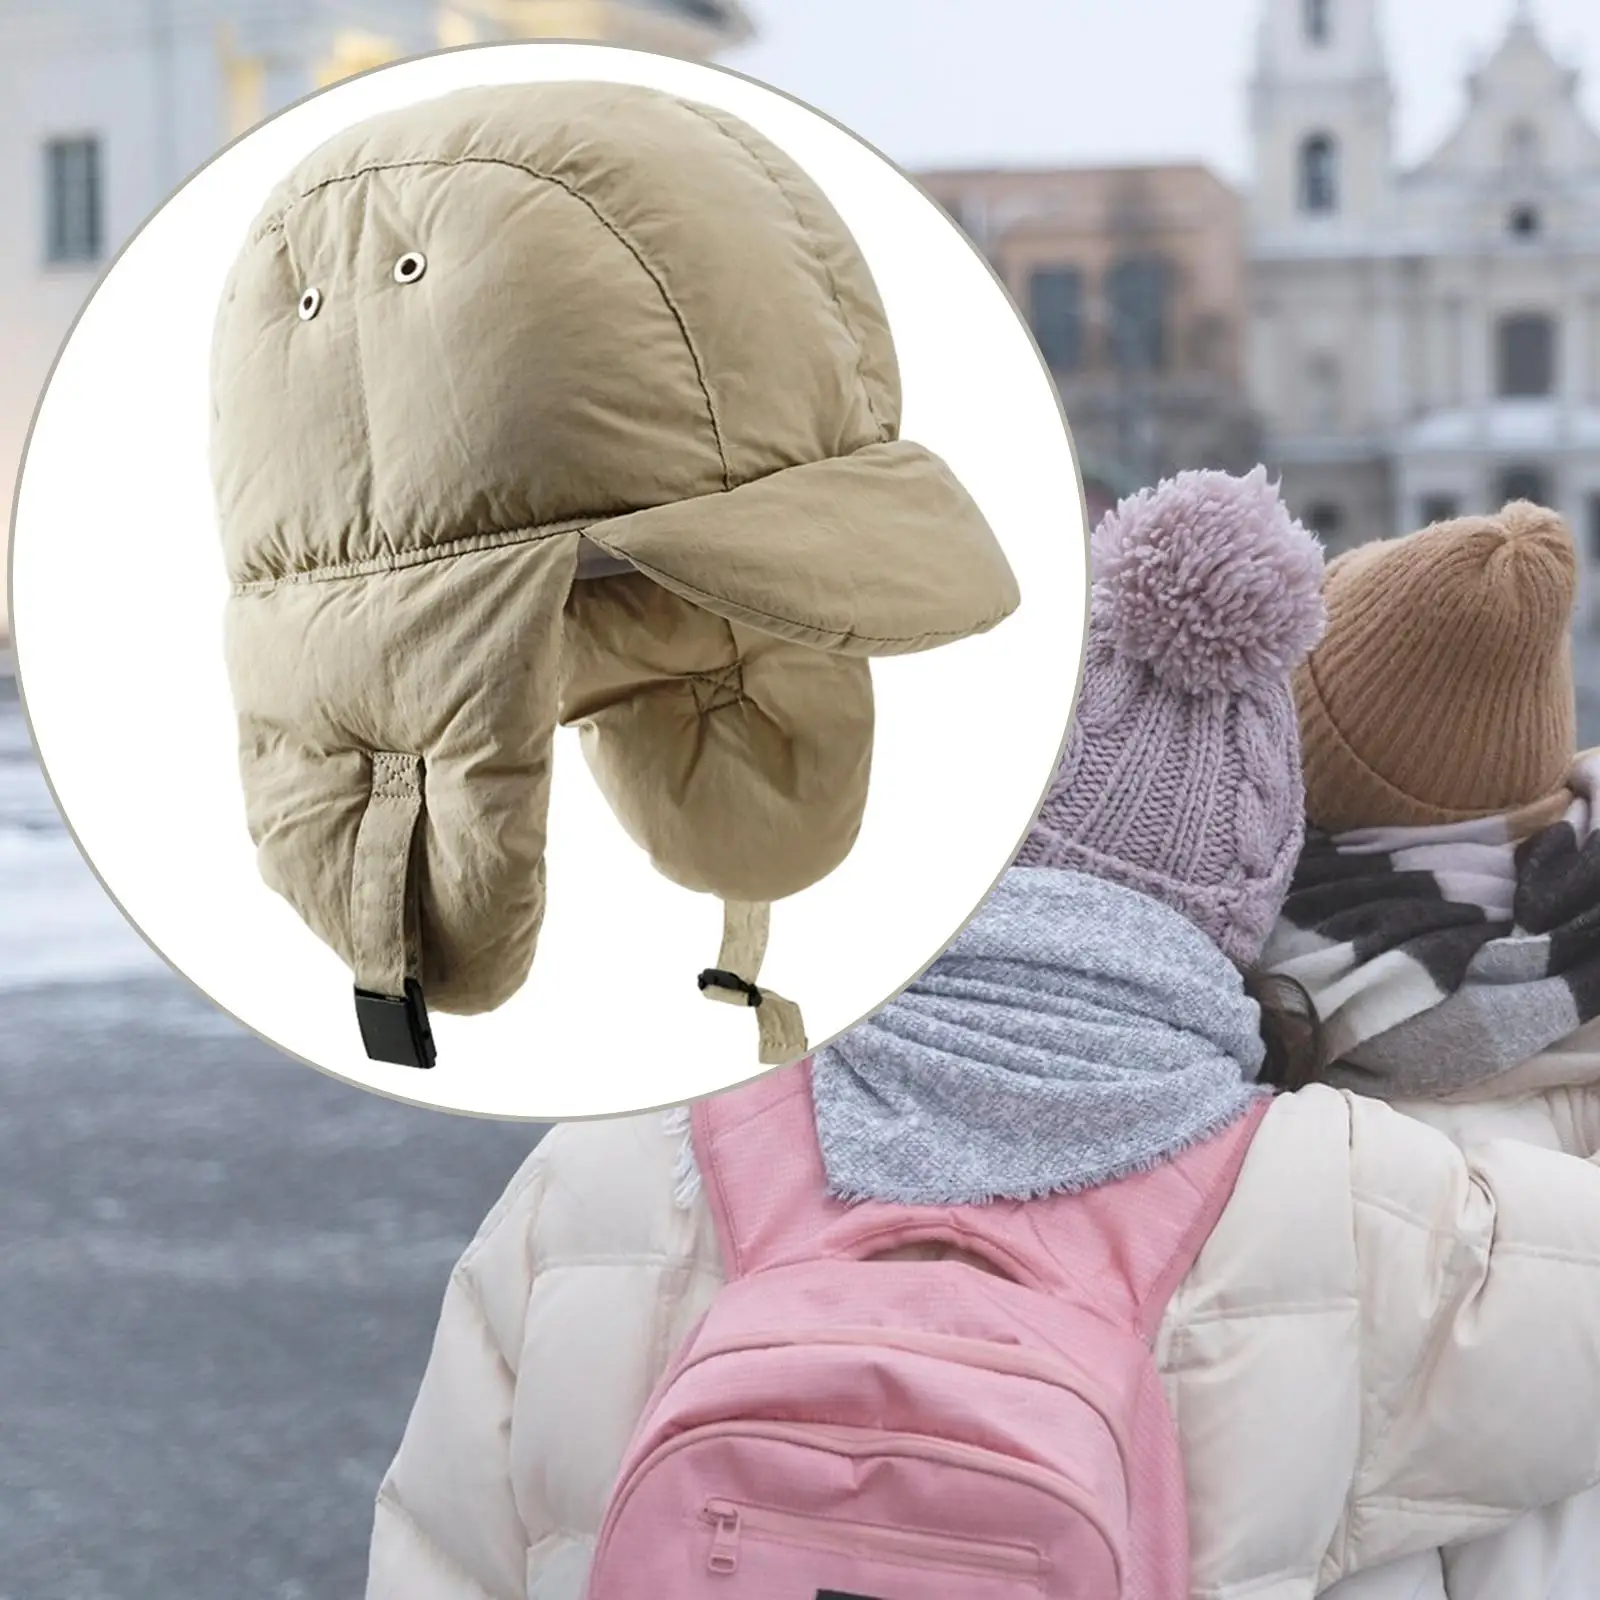 Hat with Earflaps Fashionable Baseball Cap for Women Peaked Hat Thickened Filled Hat for Hiking Skating Biking Outdoor Adults